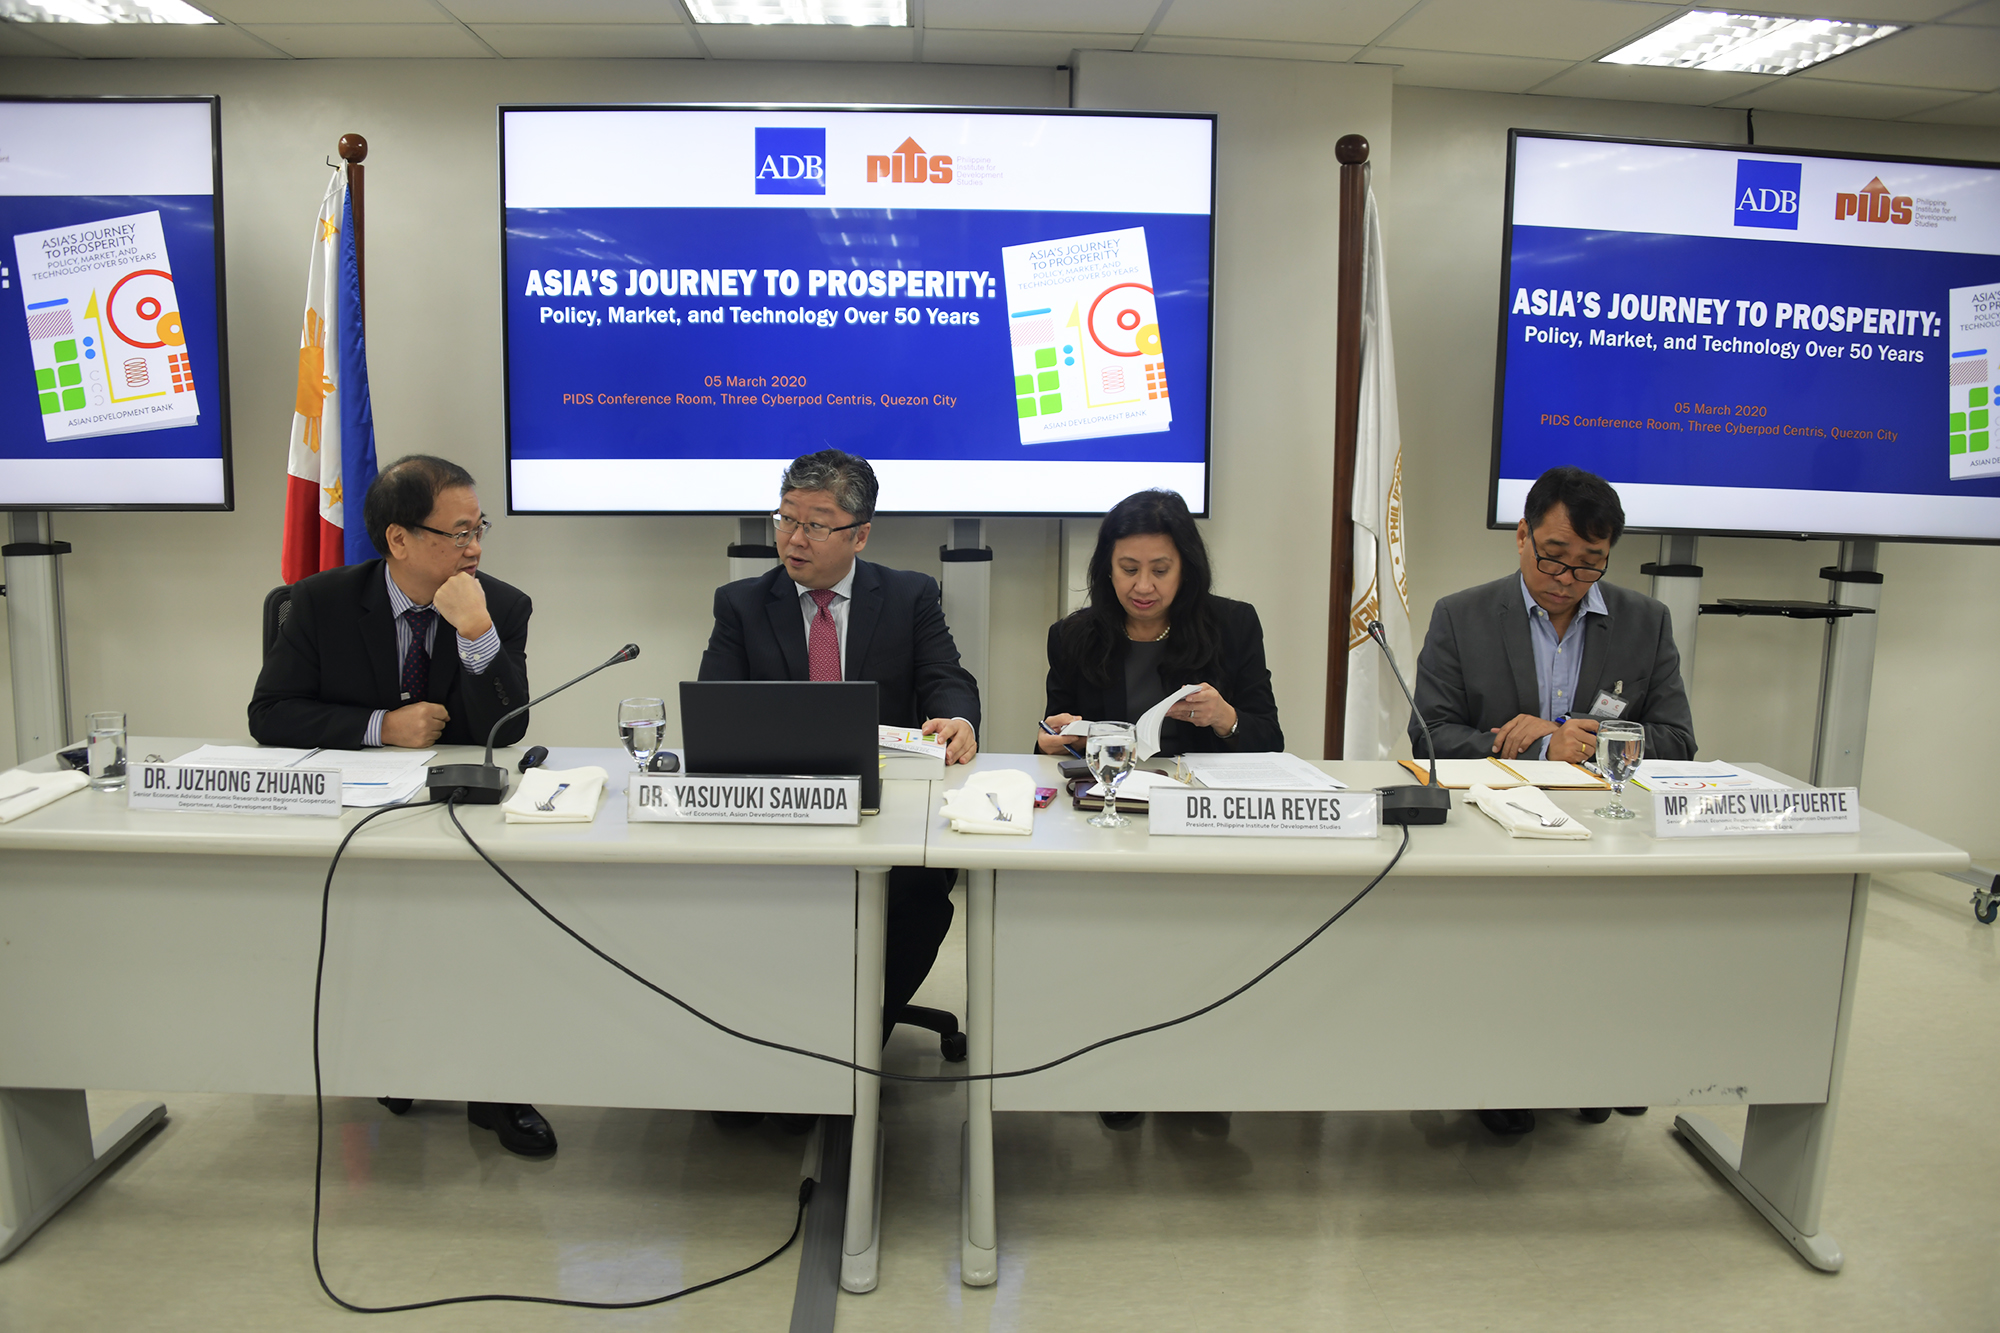 Dissemination Seminar on Asia's Journey to Prosperity: Policy, Market, and Technology over 50 Years-pids-adb-1-20200310.jpg